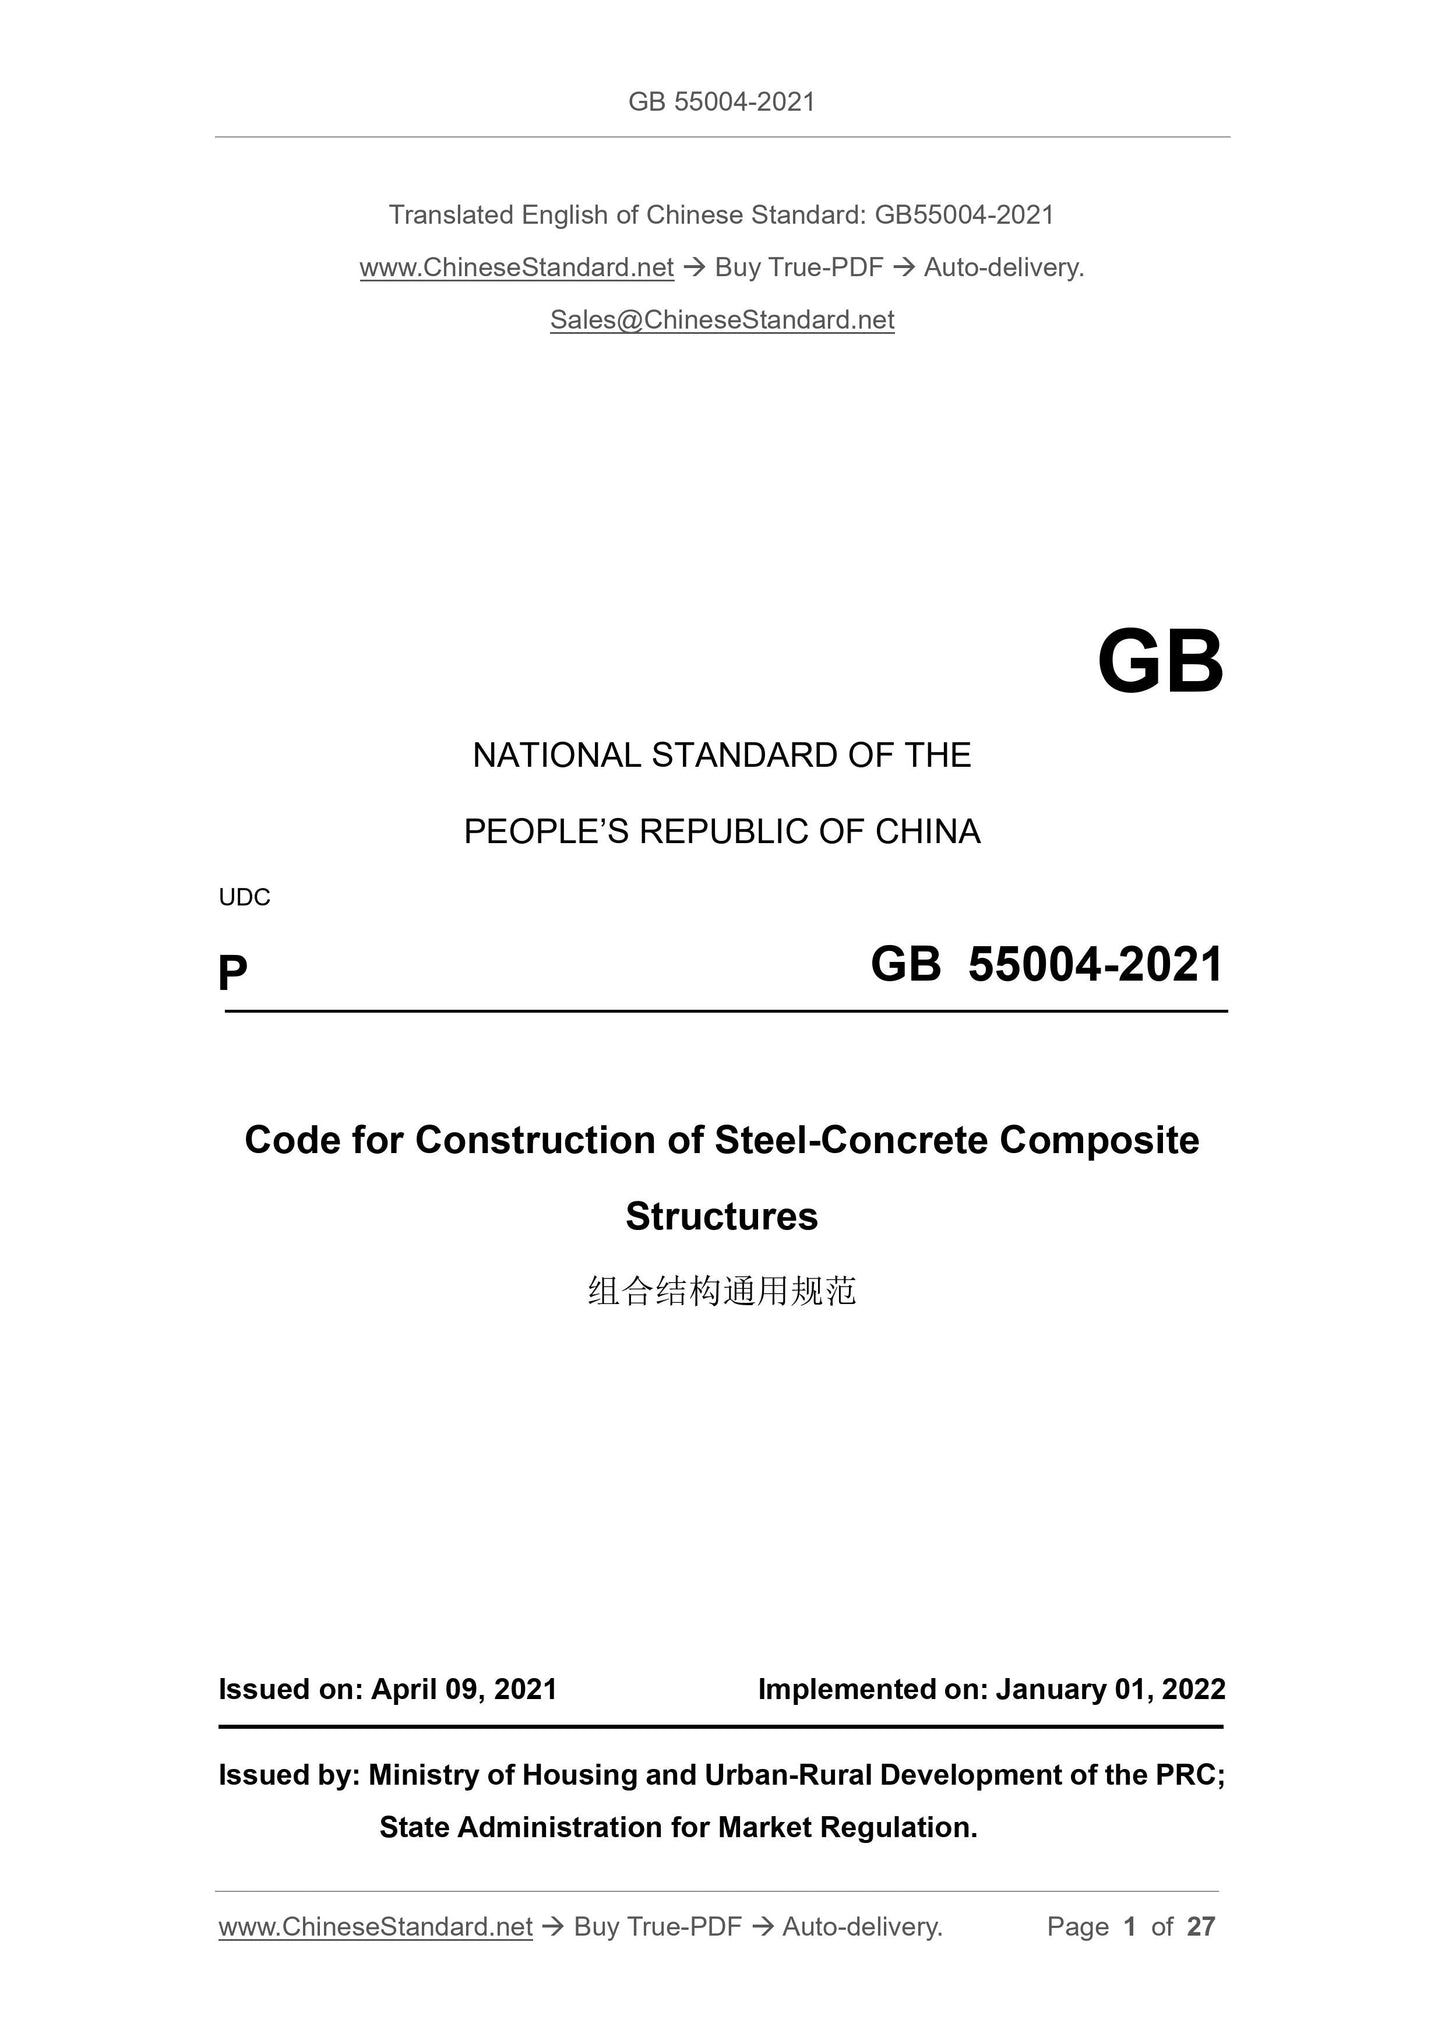 GB 55004-2021 Page 1